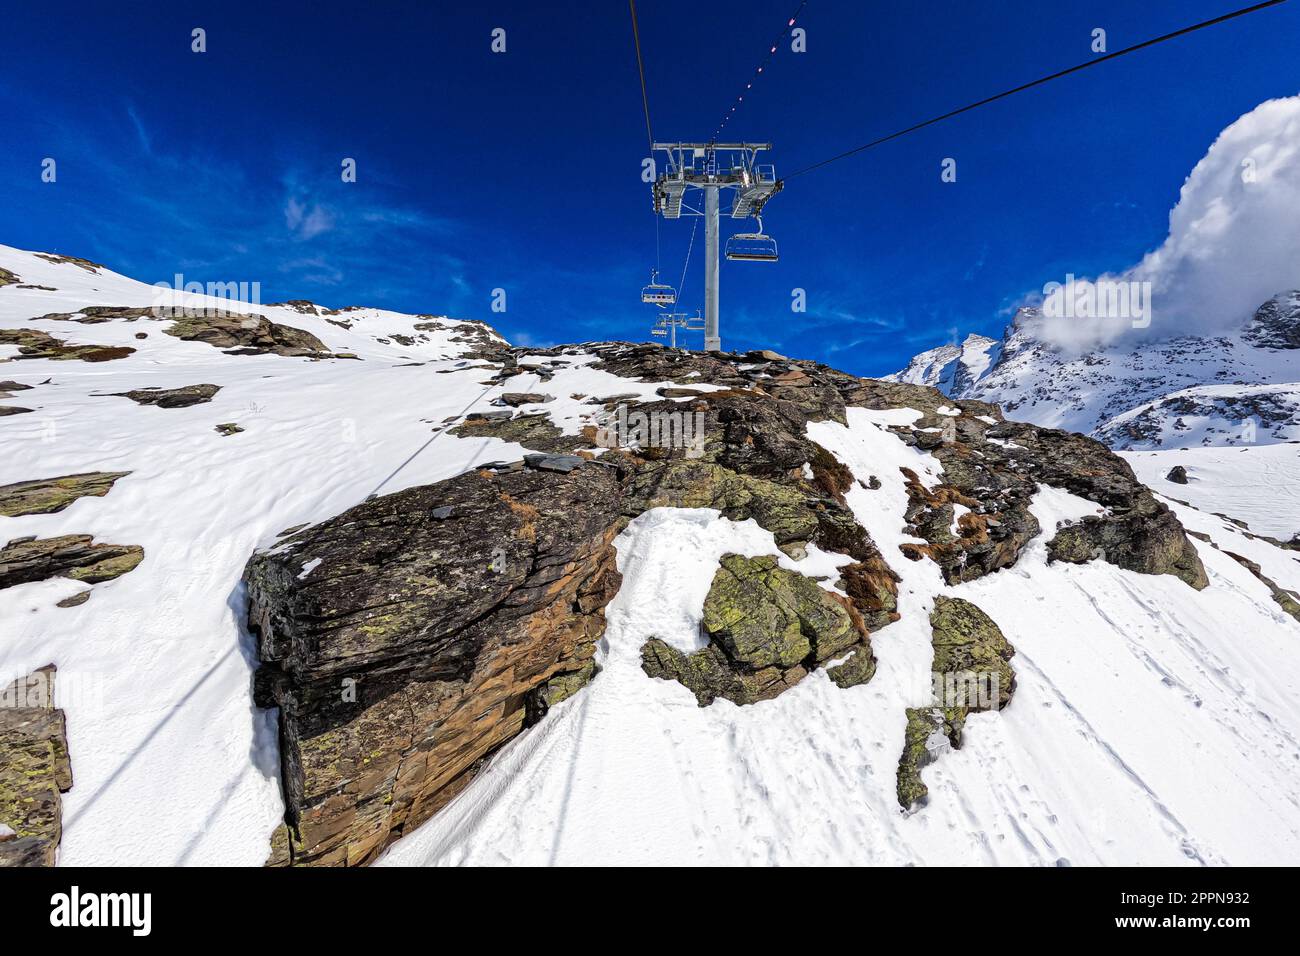 Chairlift post at the top of a snowy mountain above the Val Thorens ski resort in the French Alps Stock Photo